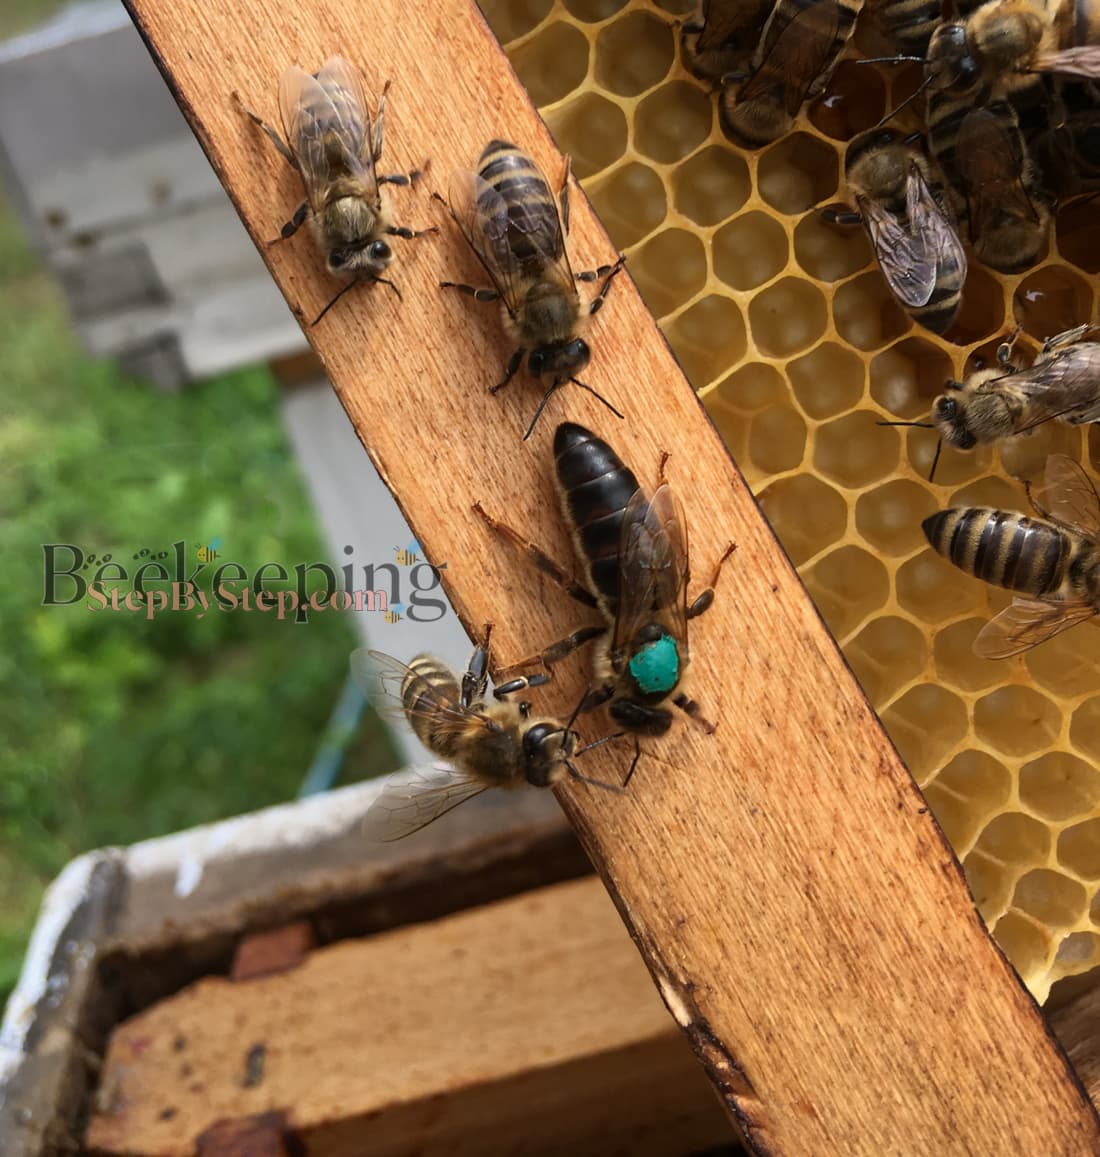 Queen bee marked with green paint and just emerged worker bee